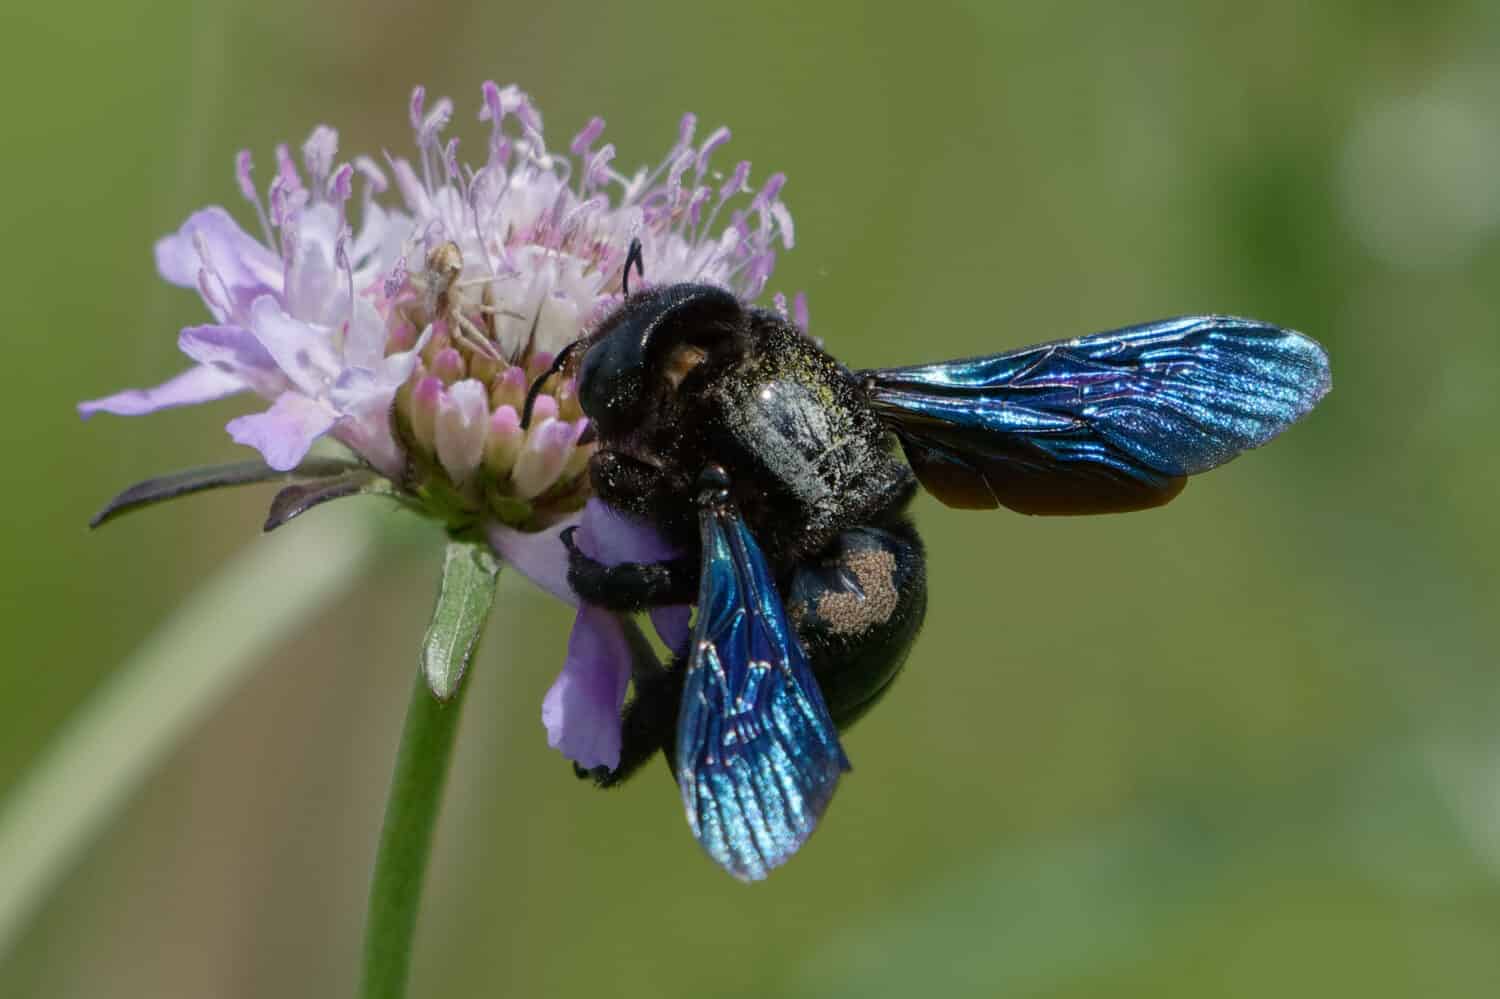 Violet carpenter bee (Xylocopa violacea) foraging a flower